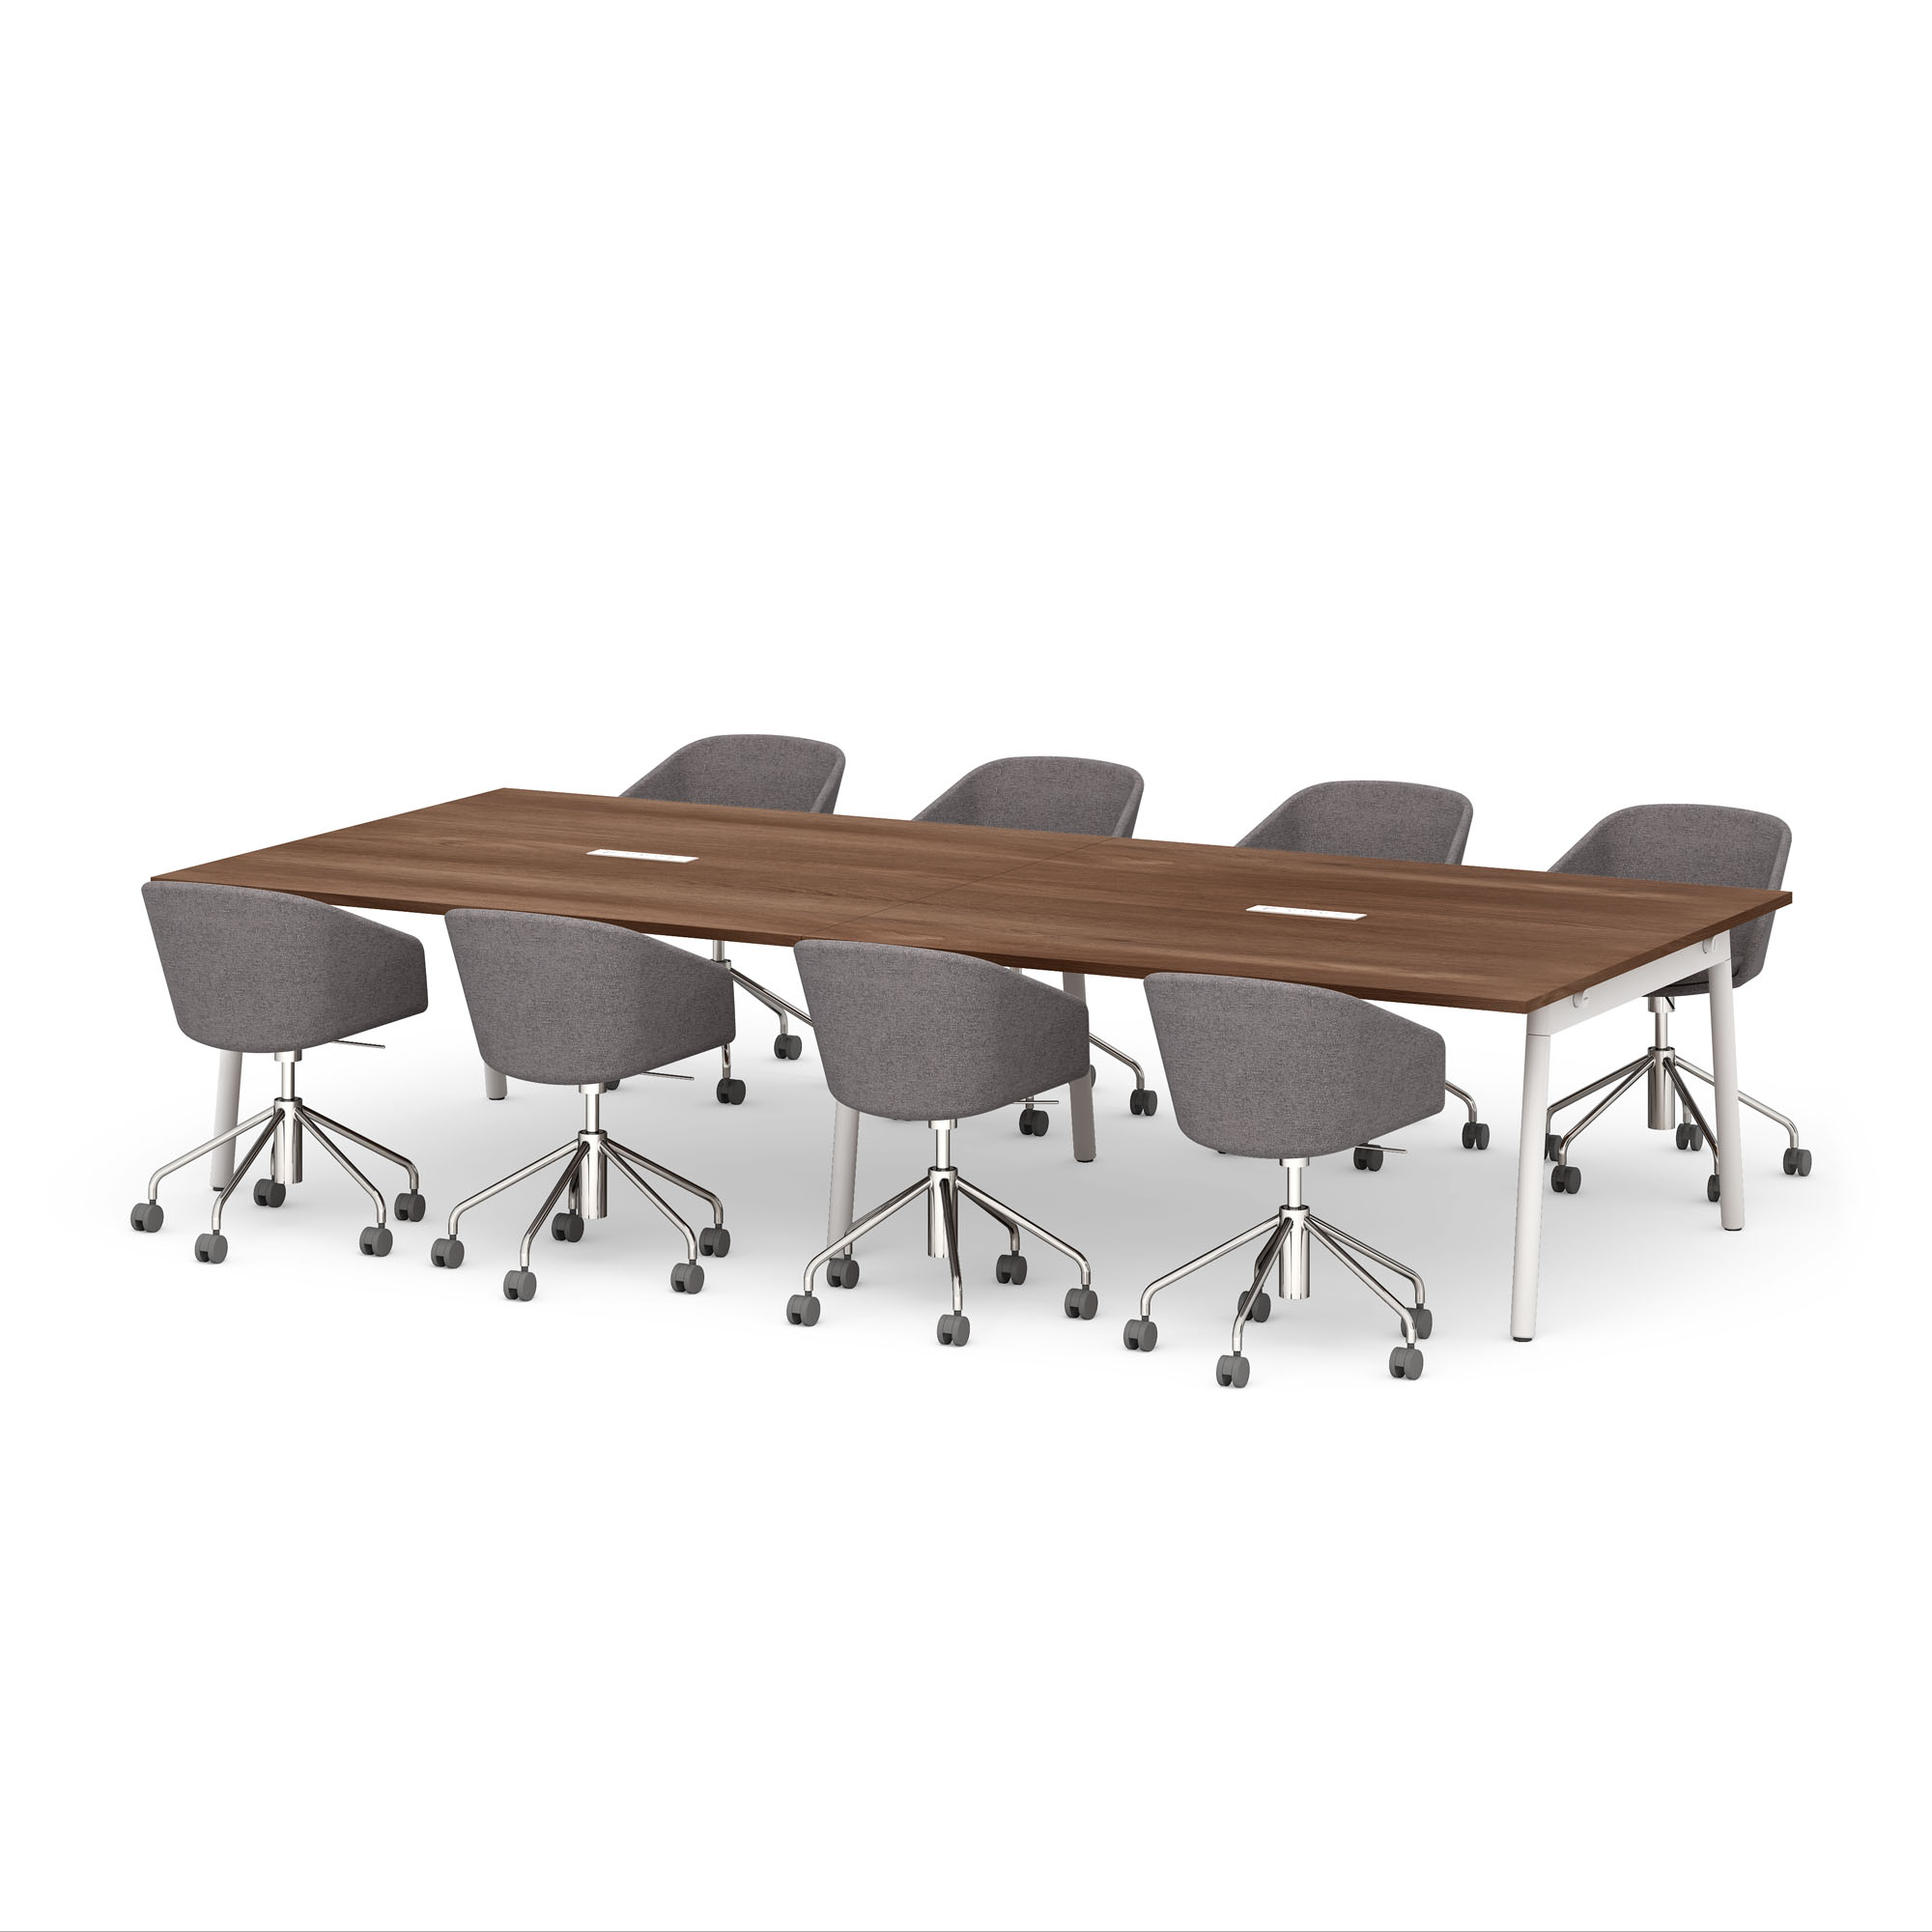 Series A Scale Rectangular Conference Table, Walnut, 132x60", White Legs,Walnut,hi-res